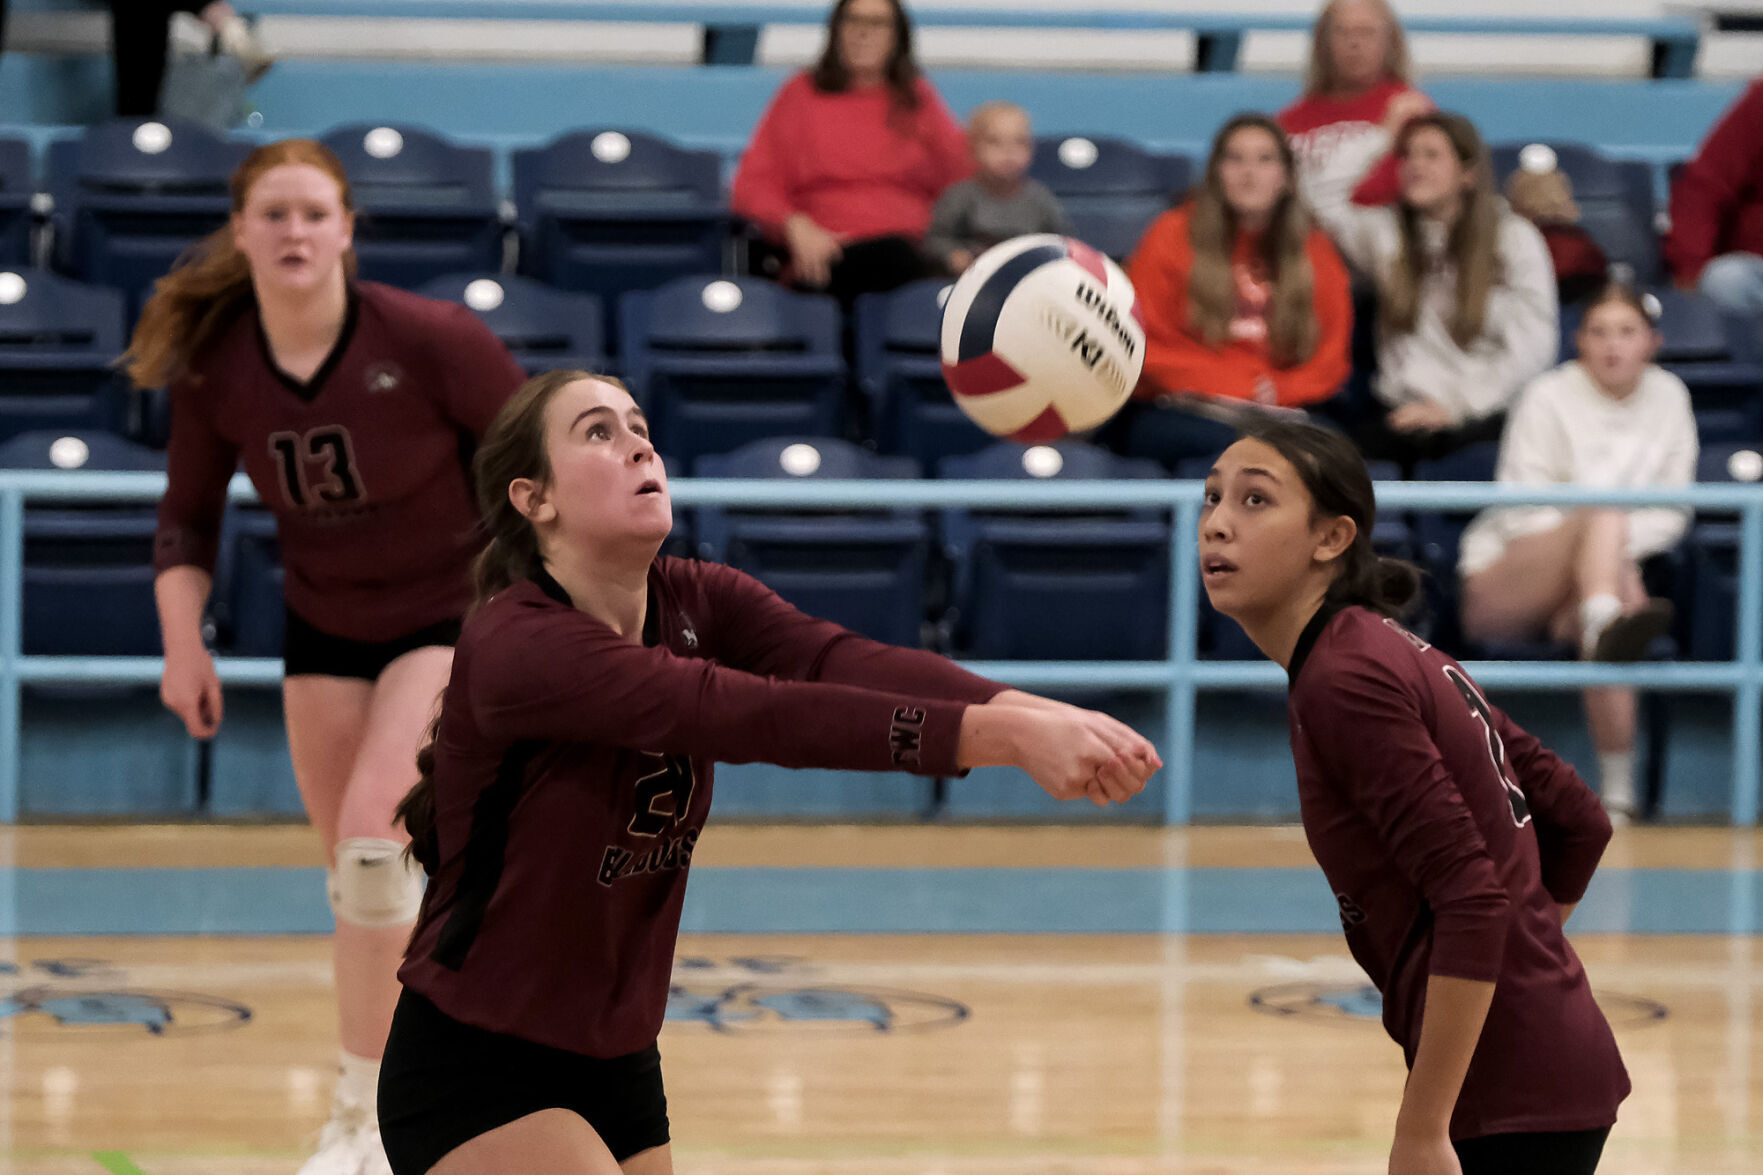 Super-Sectional Volleyball Tournament: Norris City/Omaha/Enfield Cardinals vs Effingham St. Anthony & Carmi-White County vs St. Thomas More of Champaign